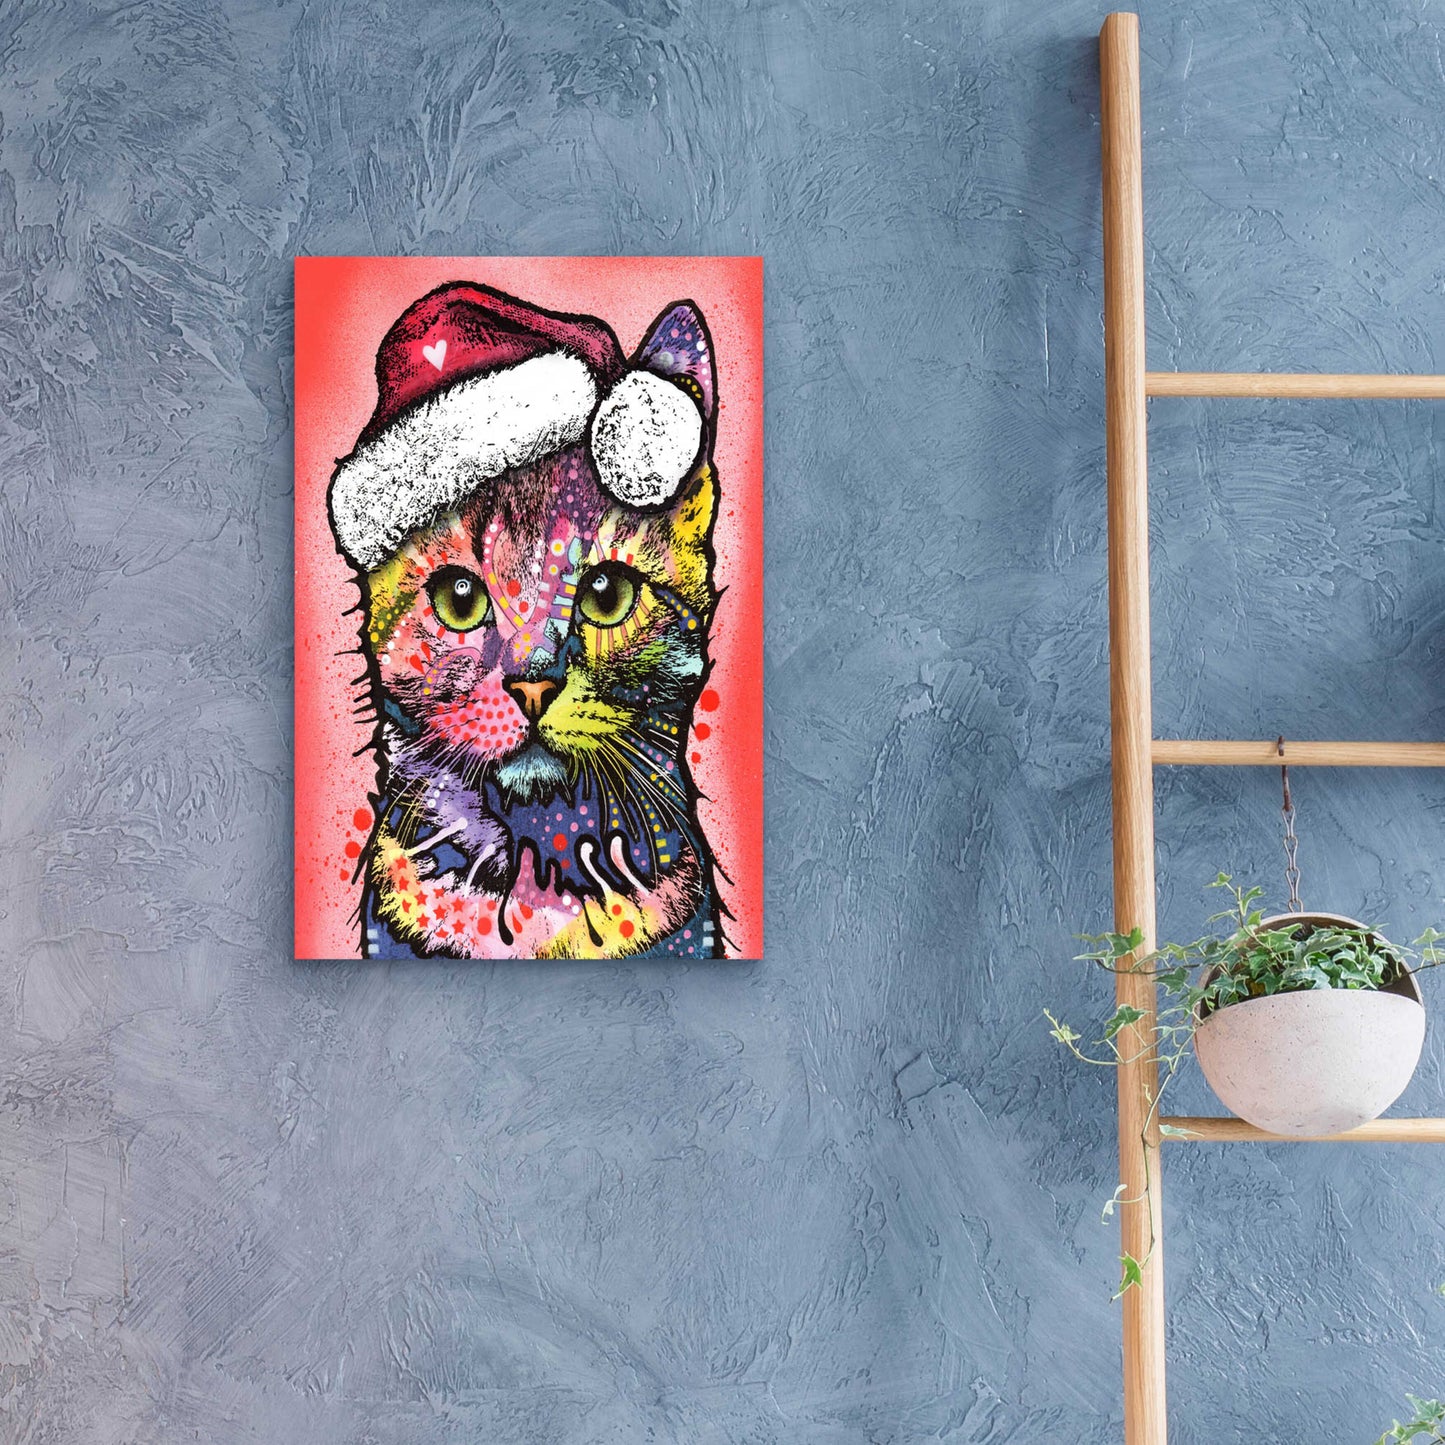 Epic Art 'Christmas Cat' by Dean Russo, Acrylic Glass Wall Art,16x24